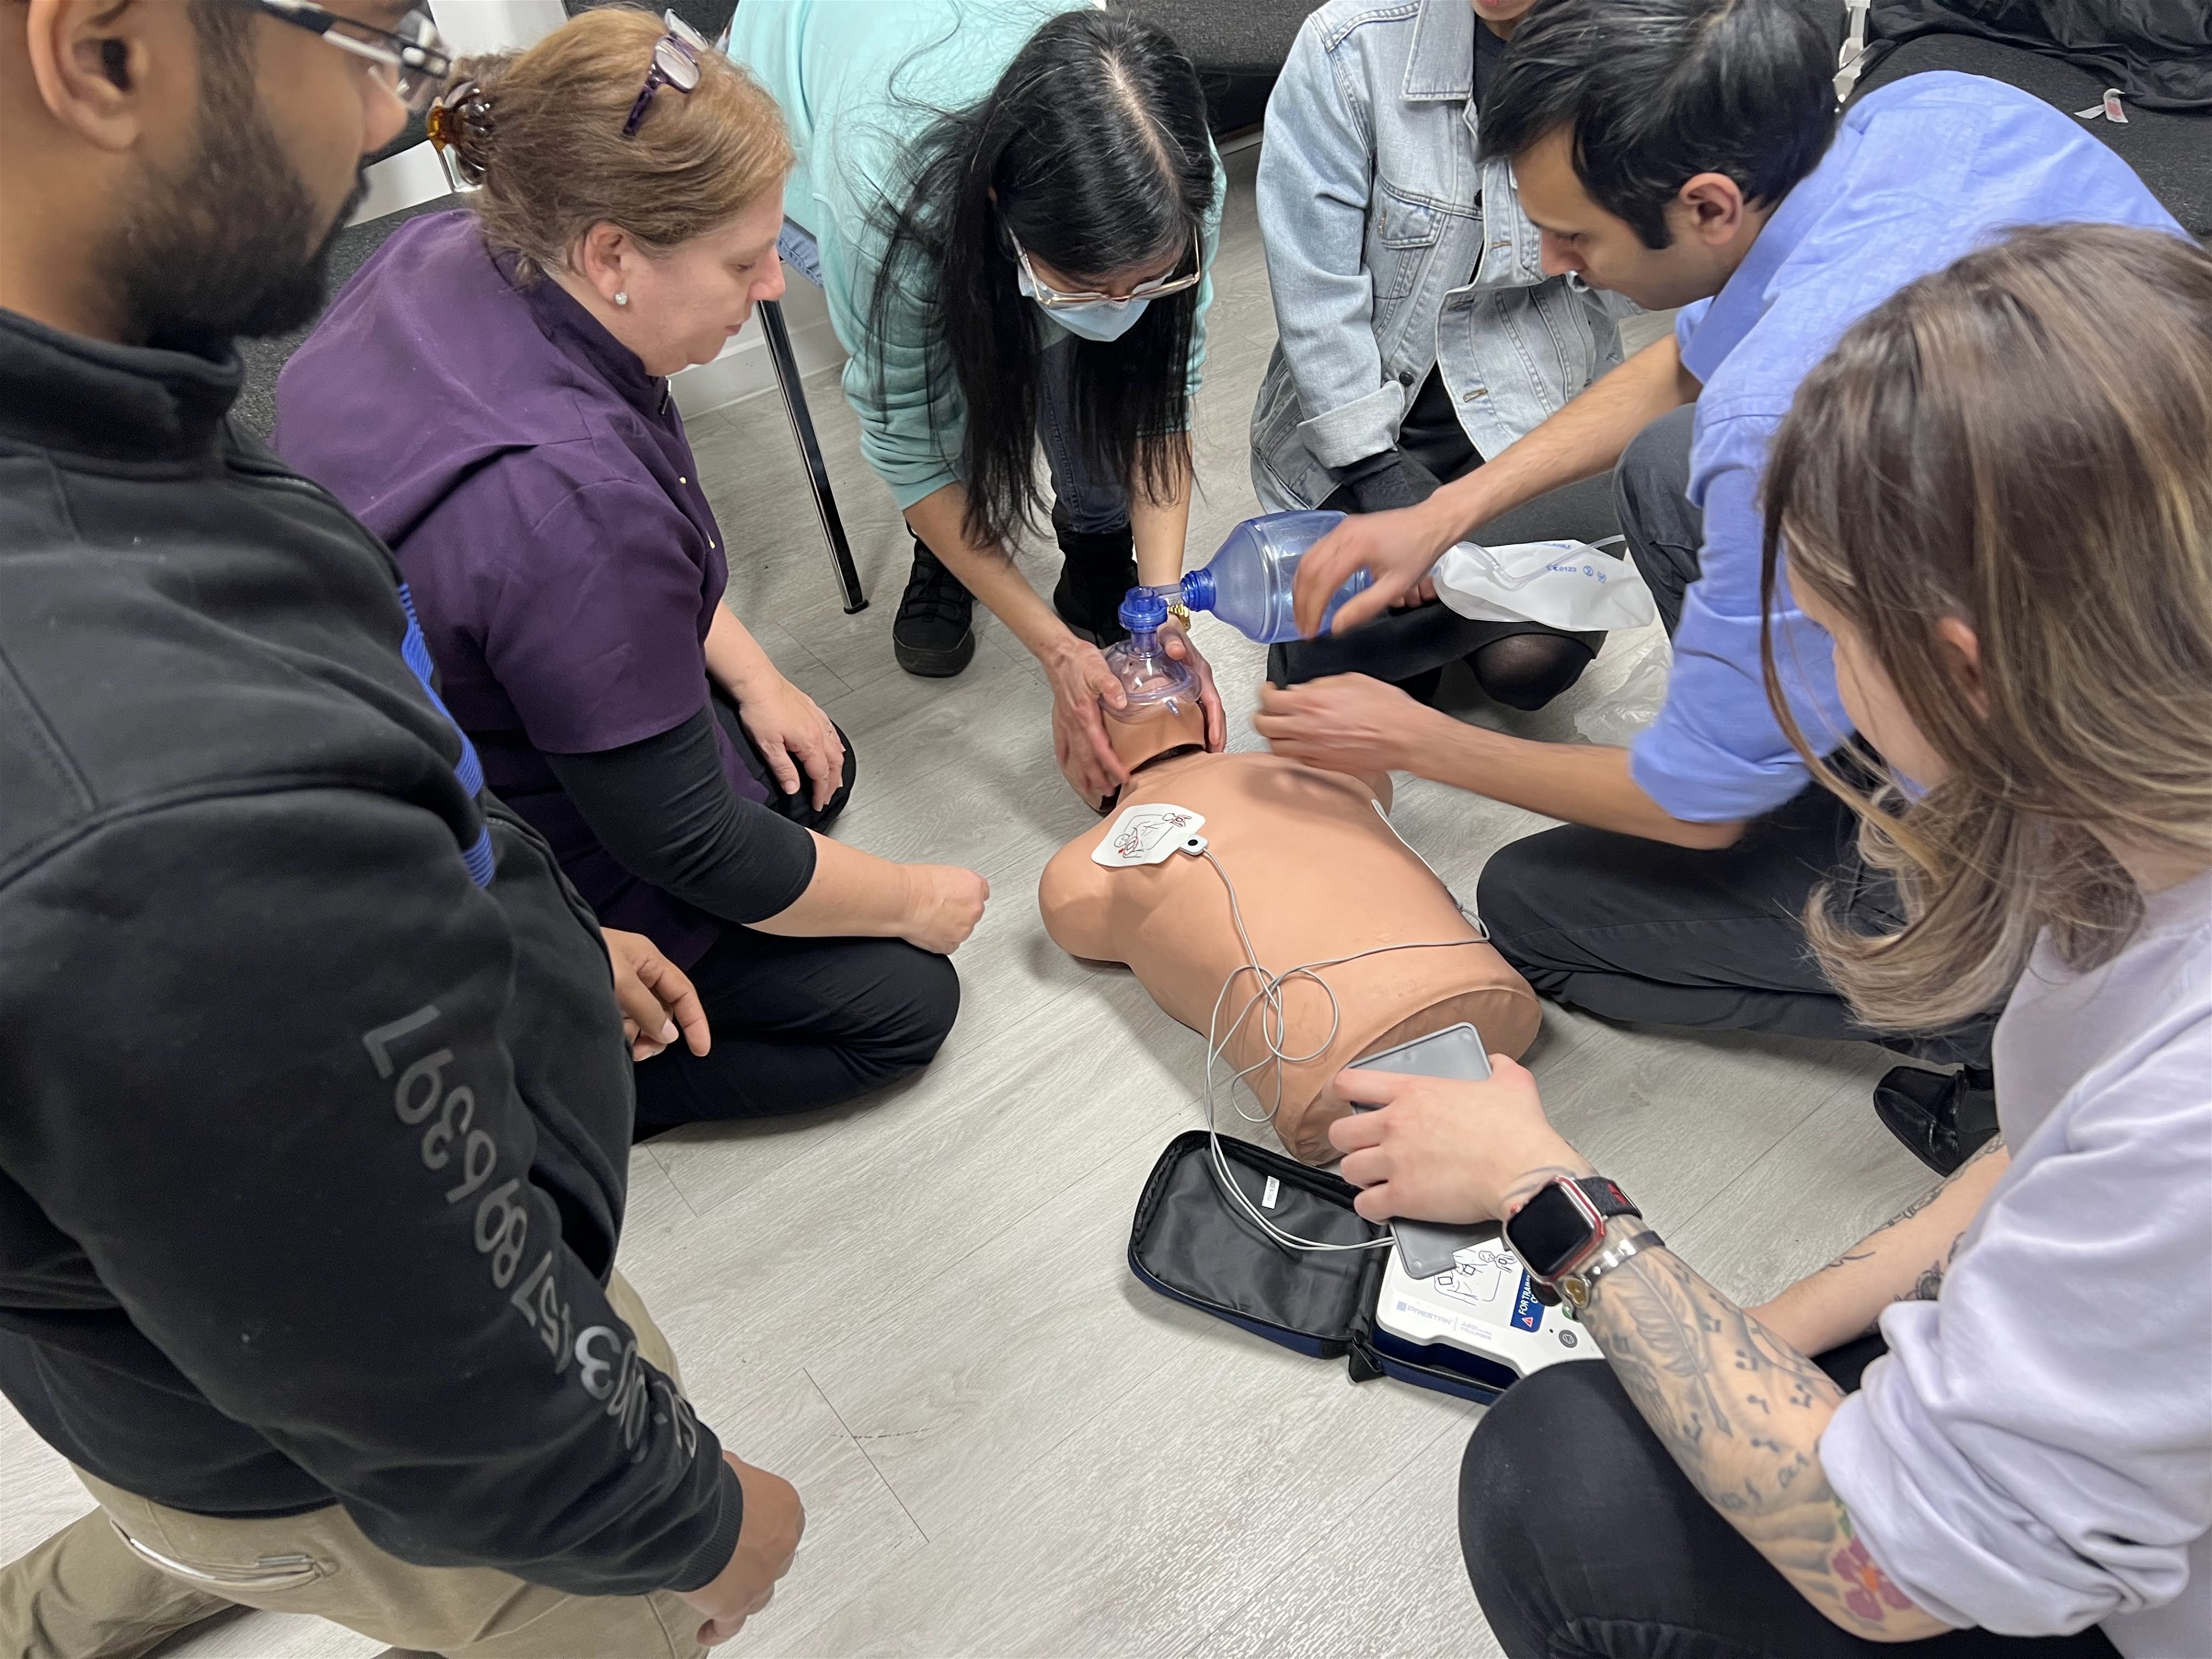 BLS First Aid Training For Dentistry